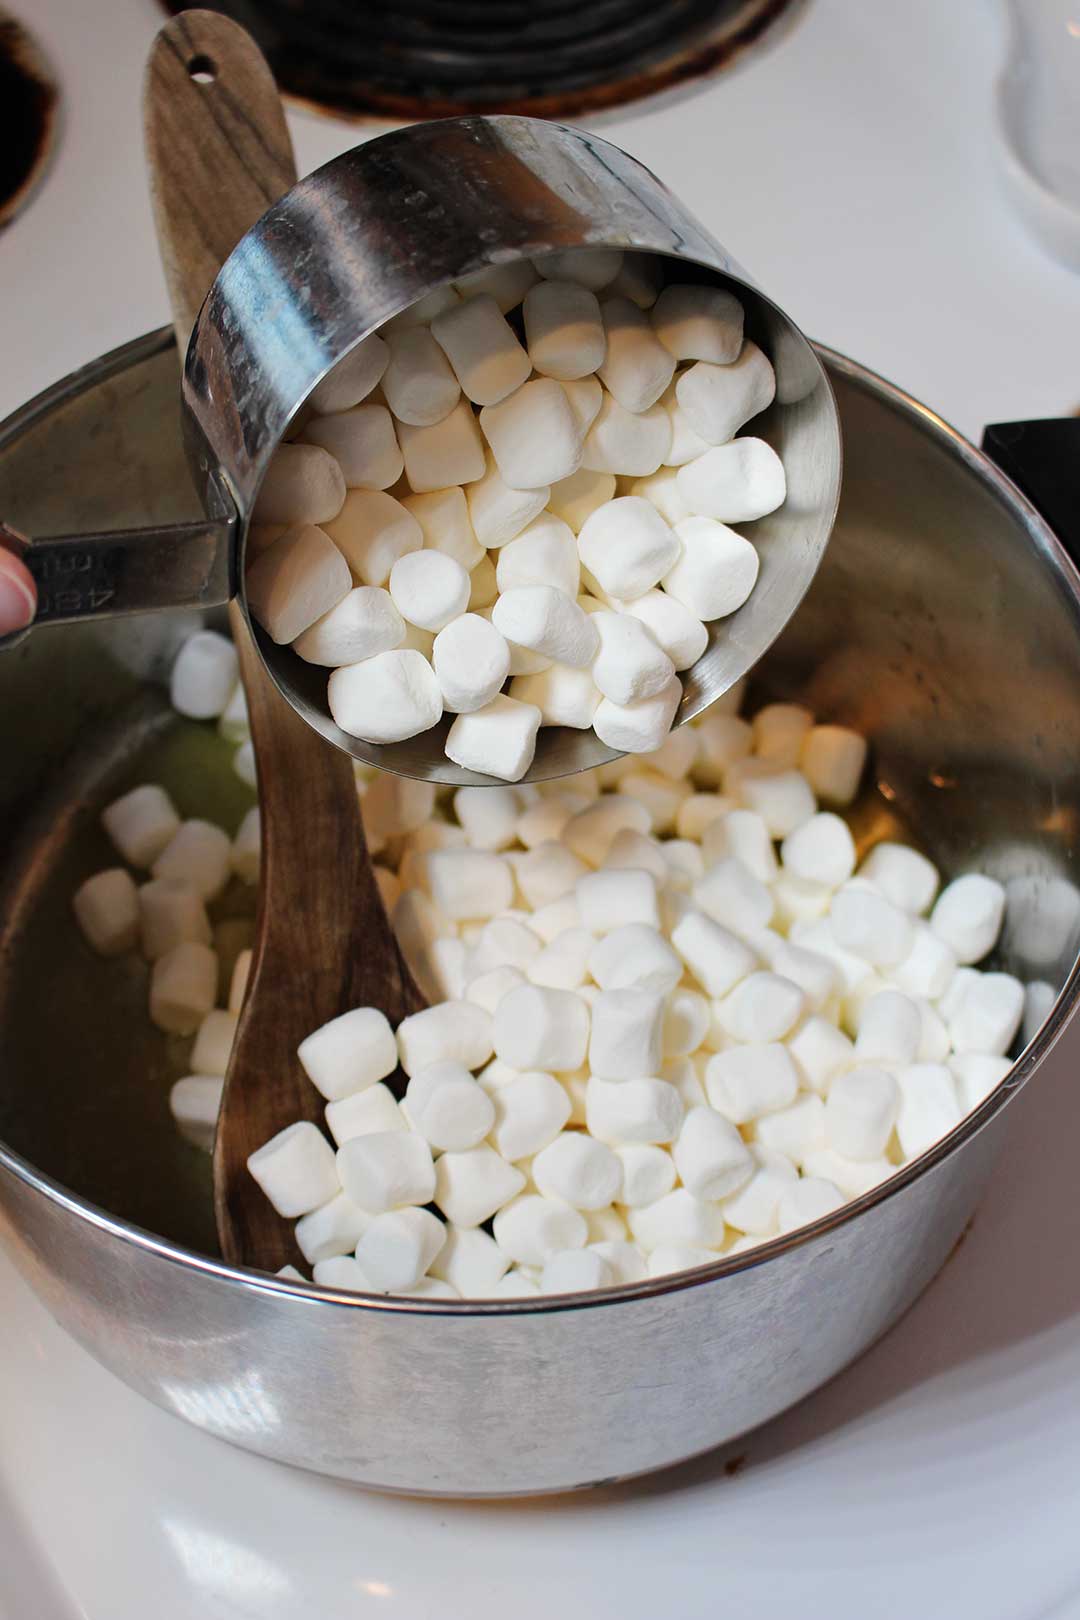 Pouring marshmallows into a pan on the stove from a measuring cup.